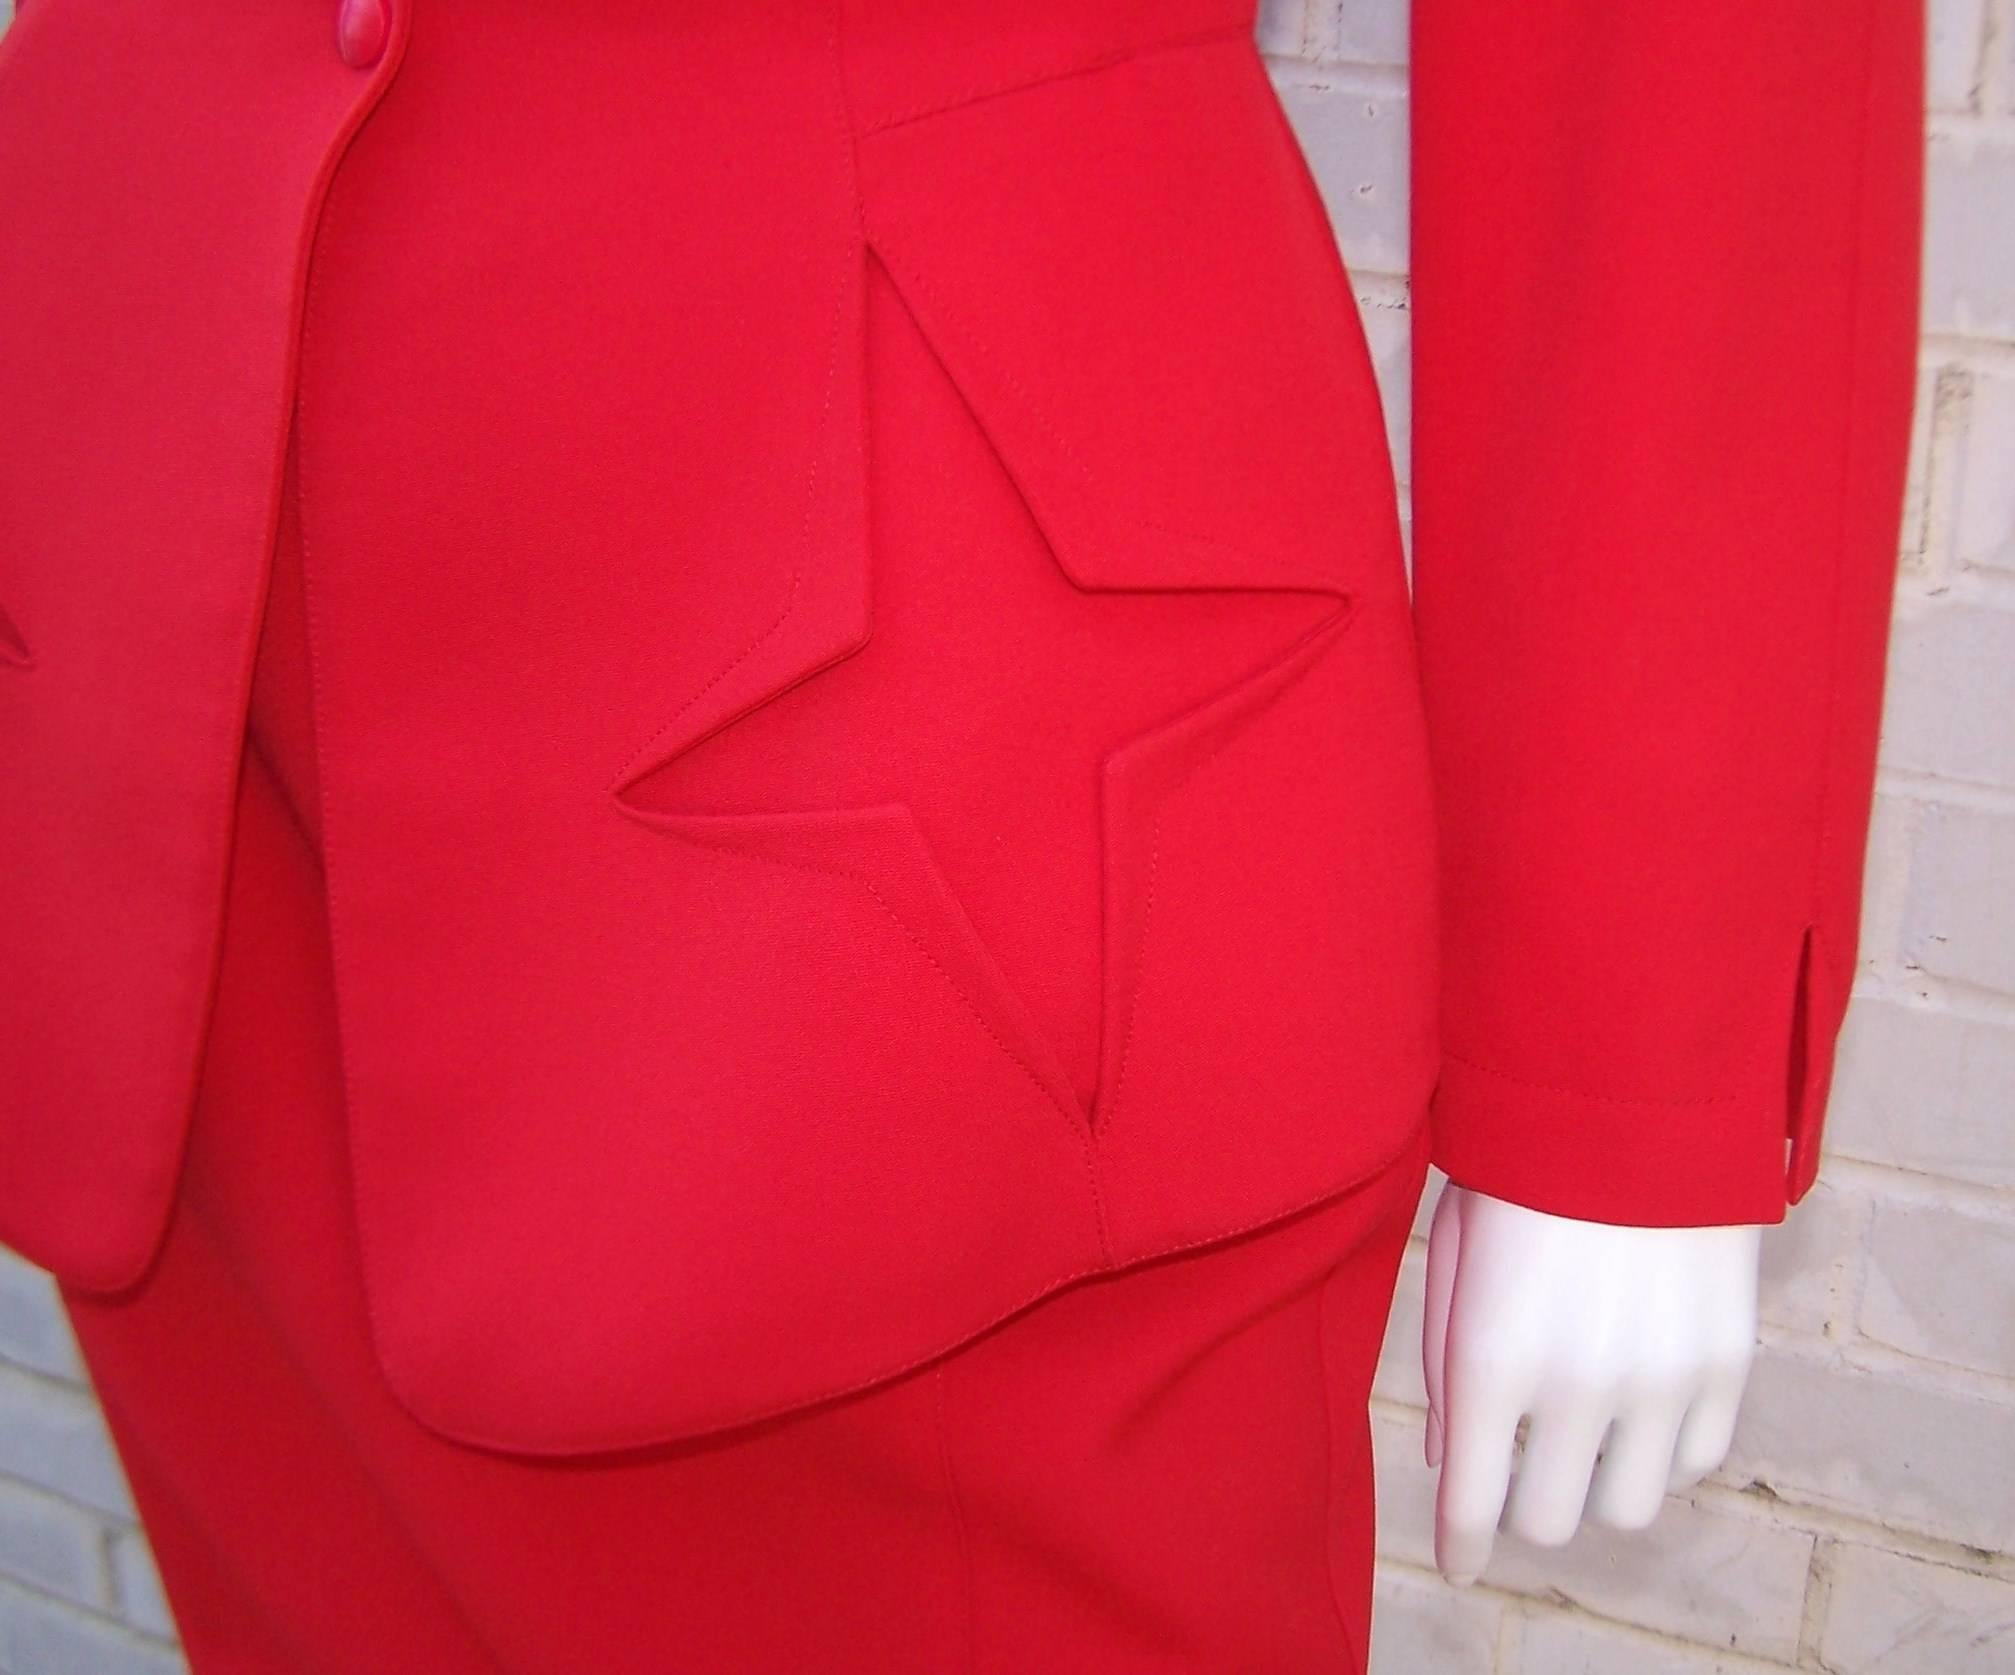 c.1990 Thierry Mugler Fiery Red Suit With Star Pockets & Stylized Skirt 3